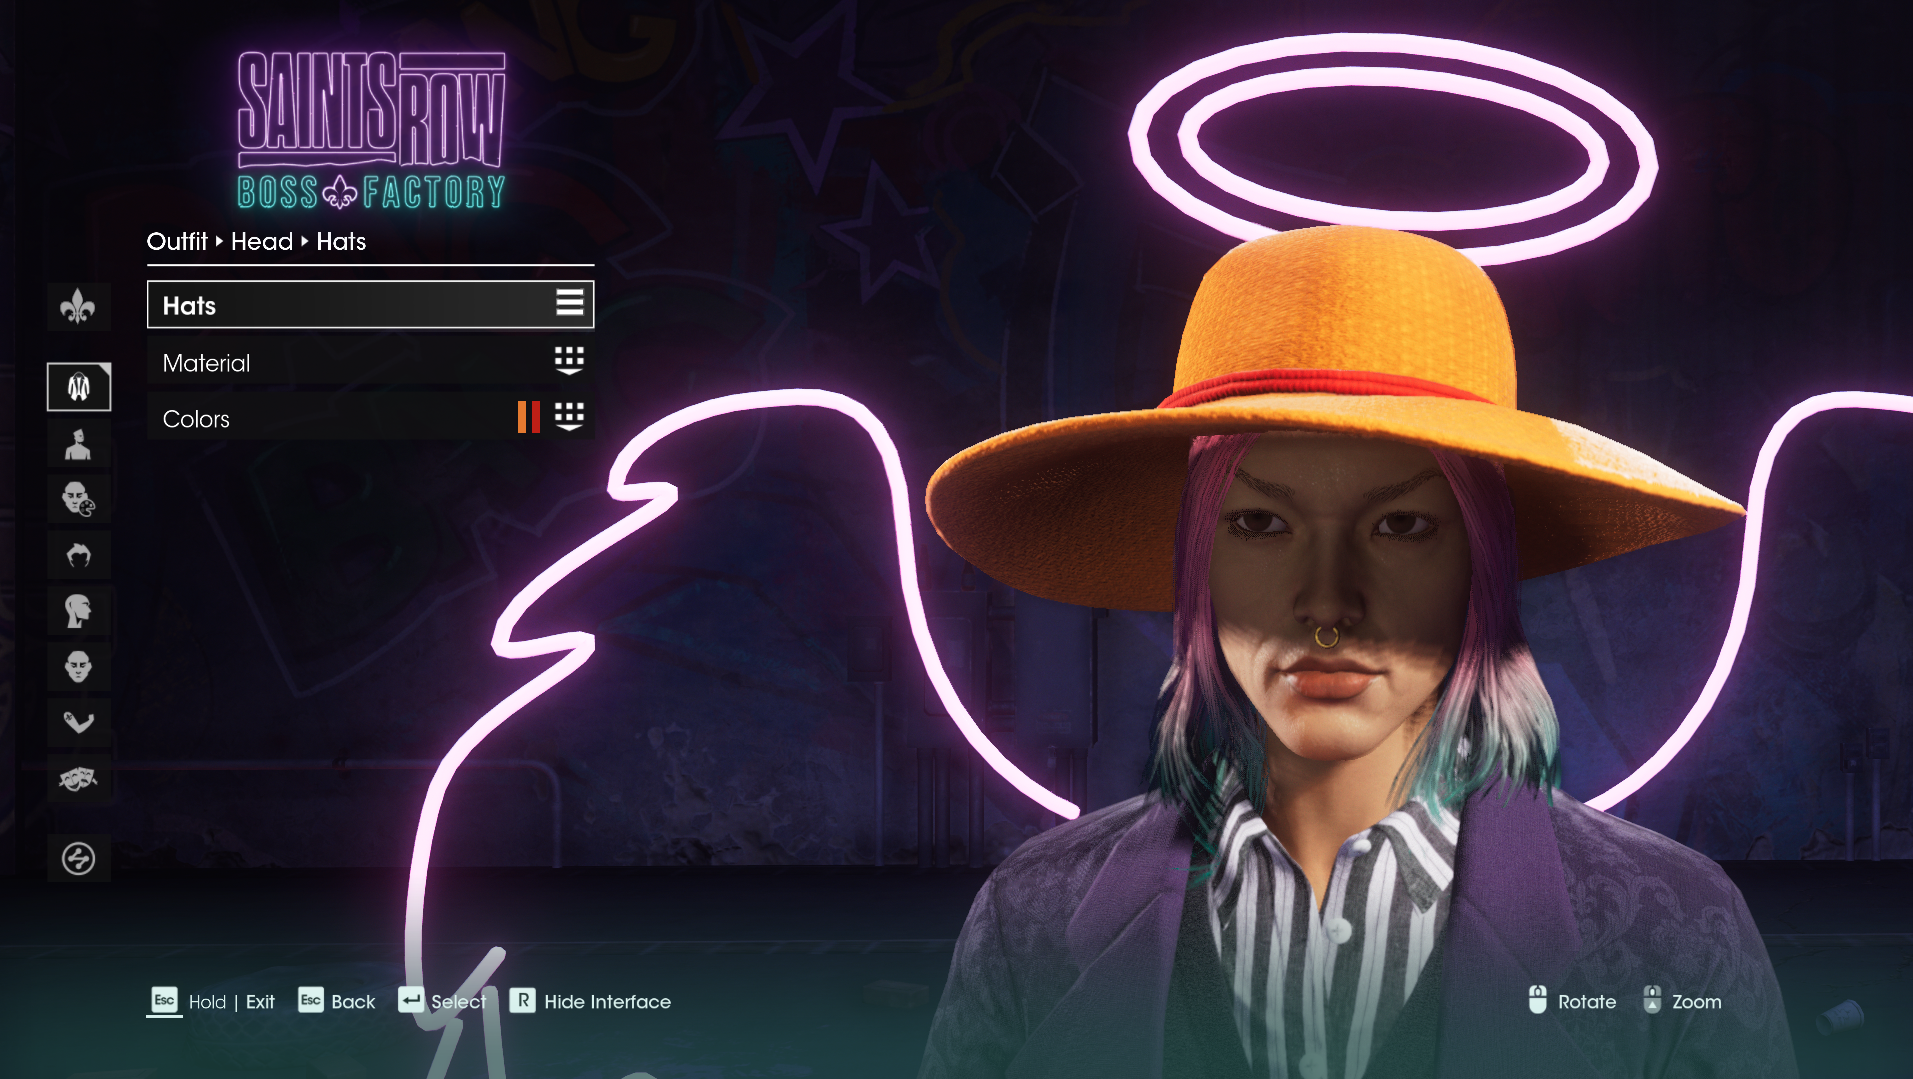 Saints Row Boss Factory - OUT NOW